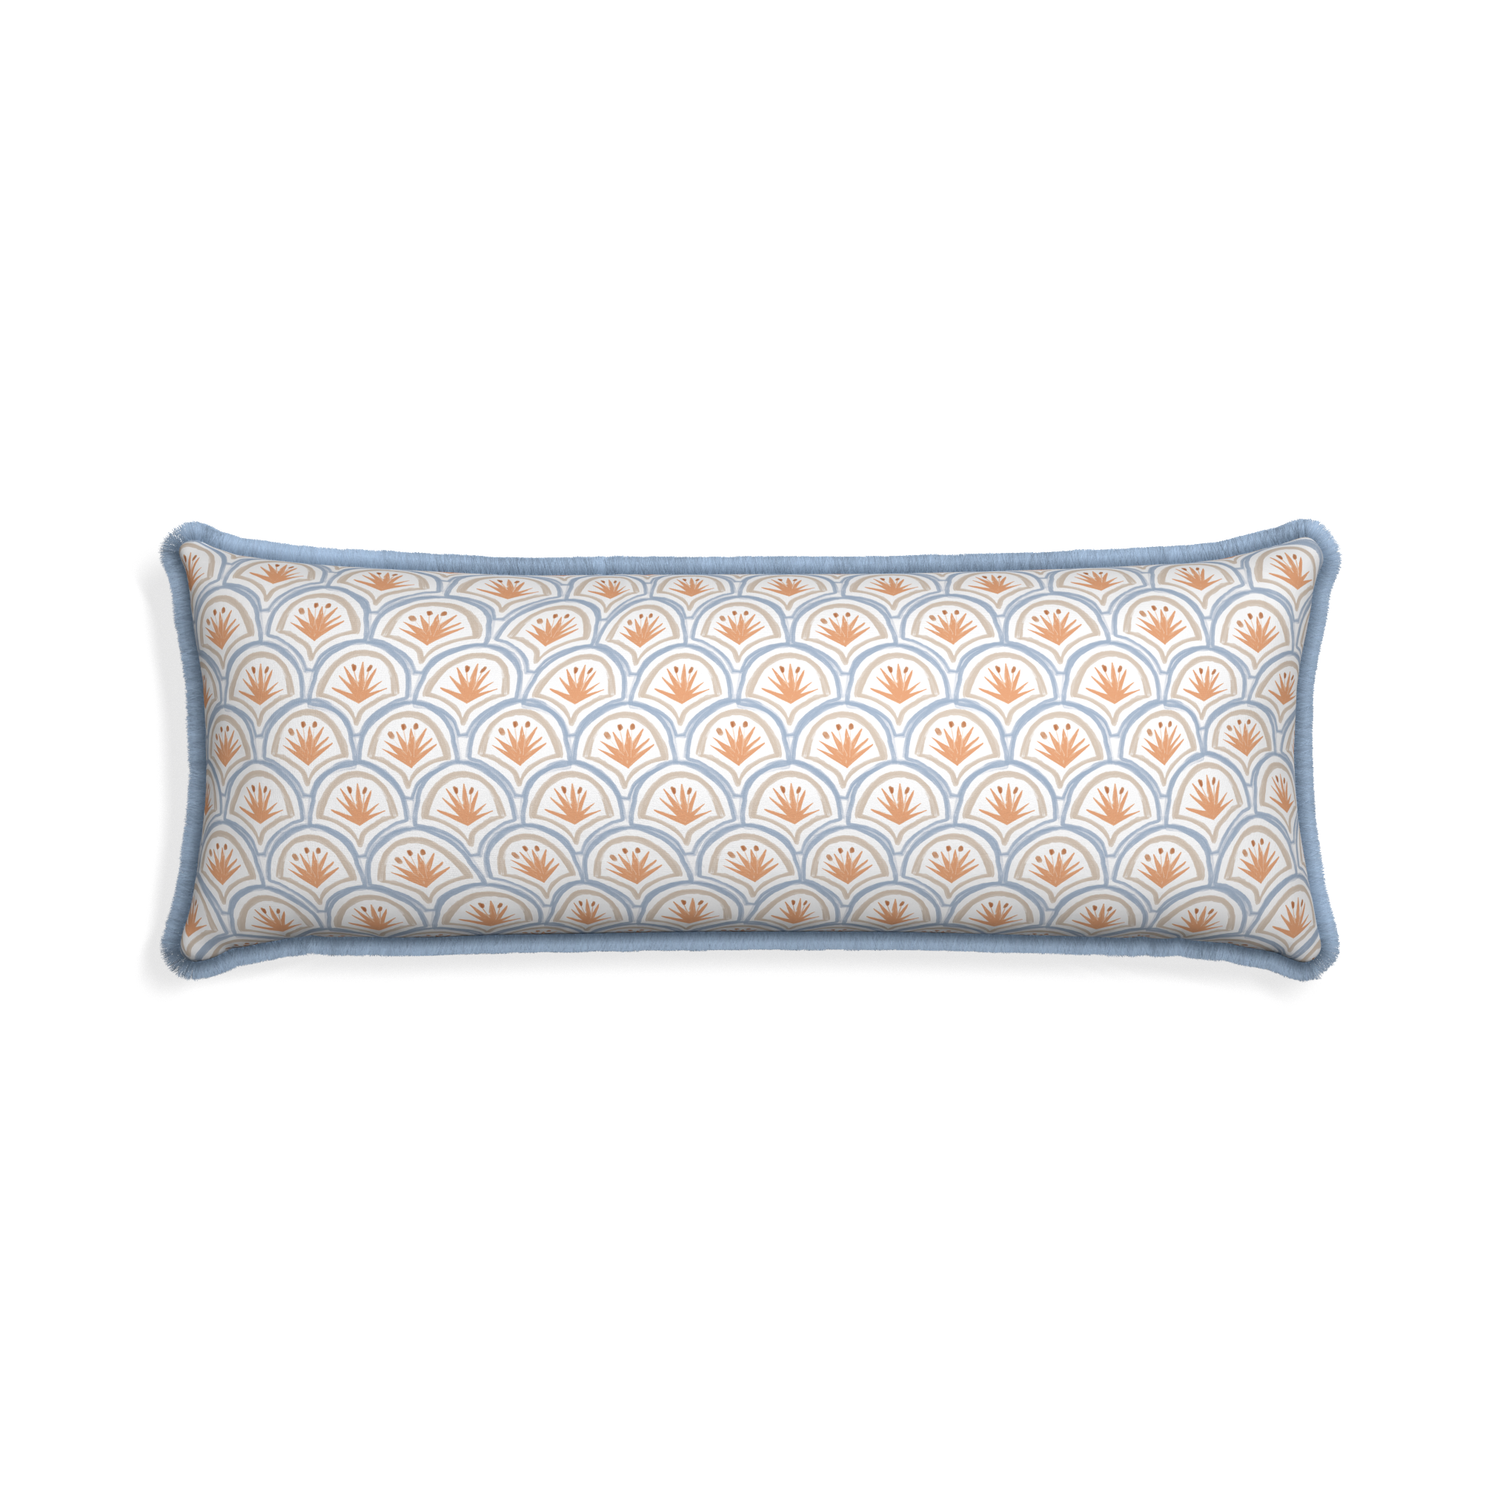 Xl-lumbar thatcher apricot custom pillow with sky fringe on white background